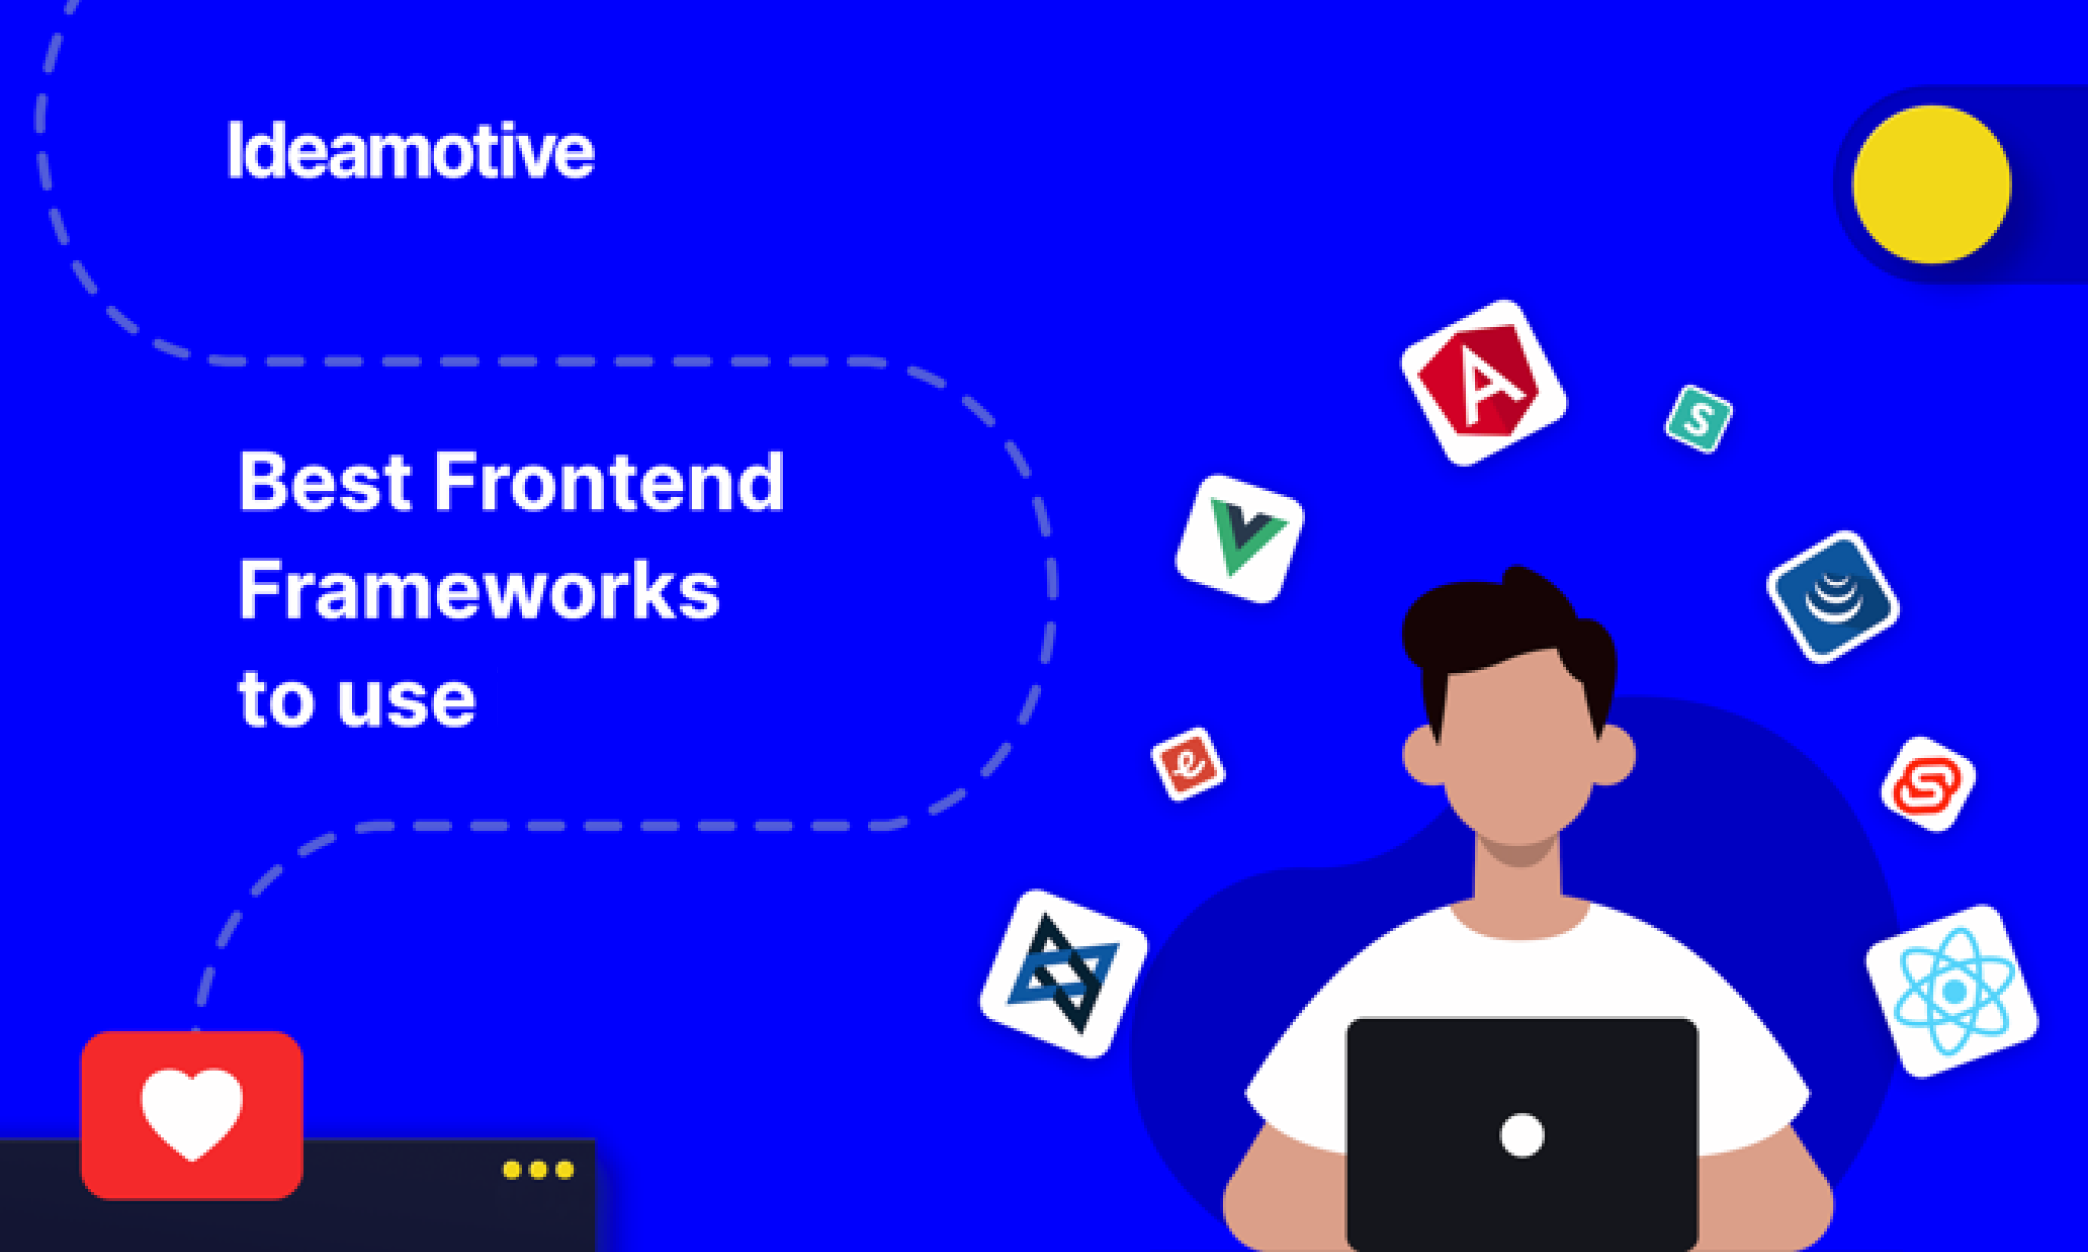 What are the best frontend frameworks to use